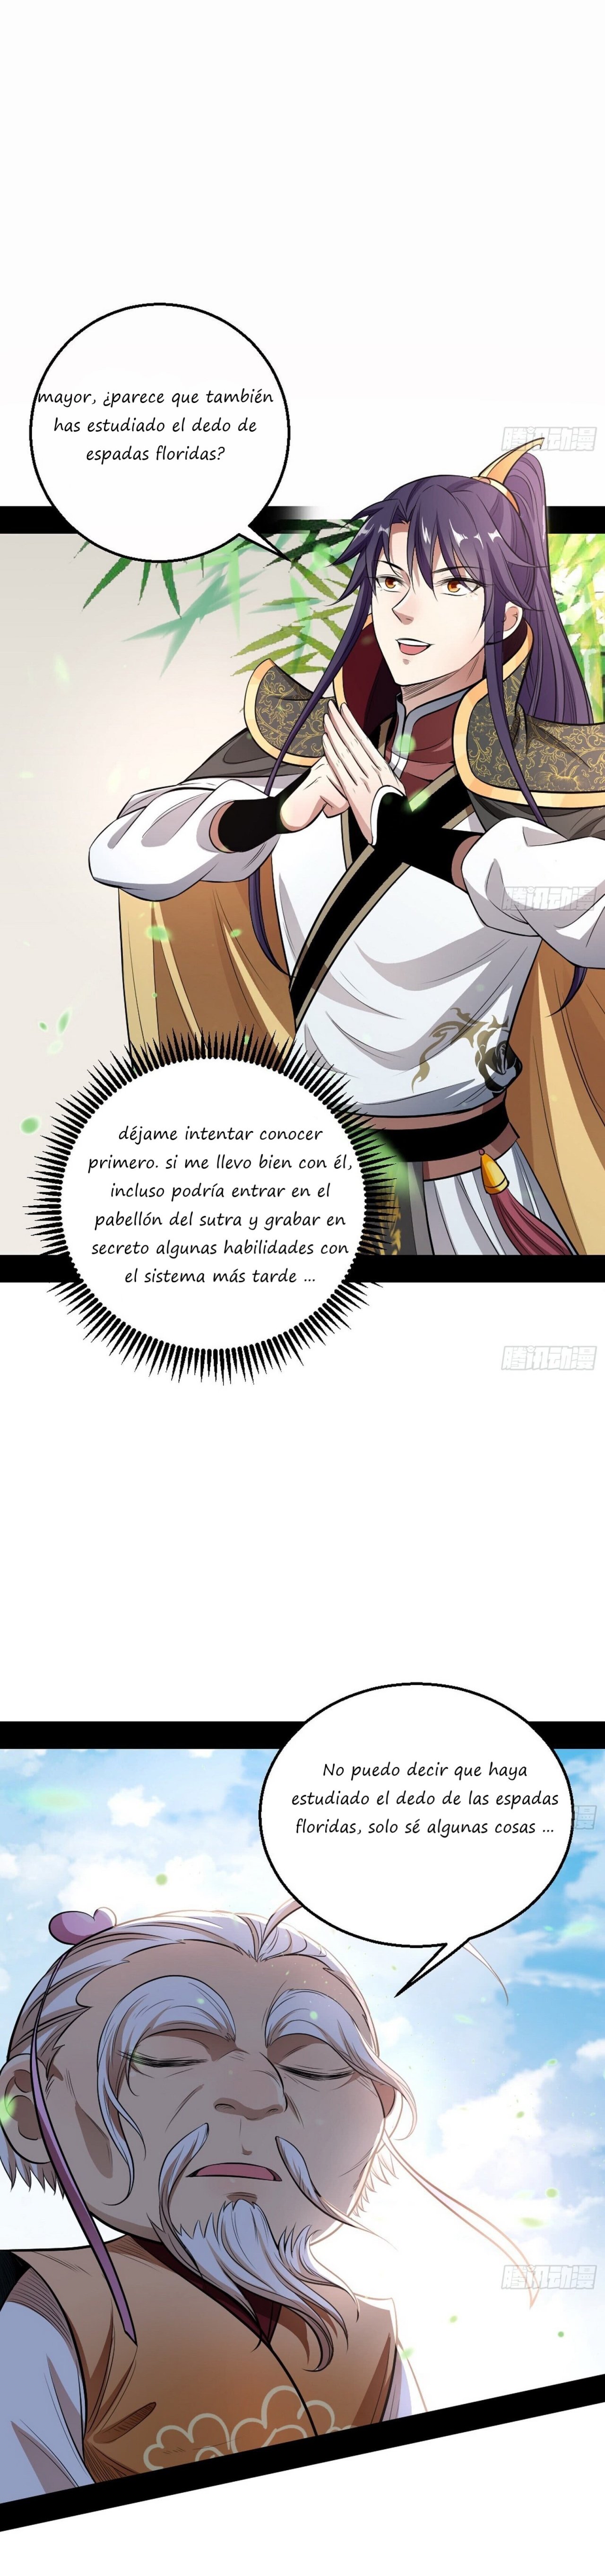 Manga Soy un dios maligno Chapter 44 image number 24